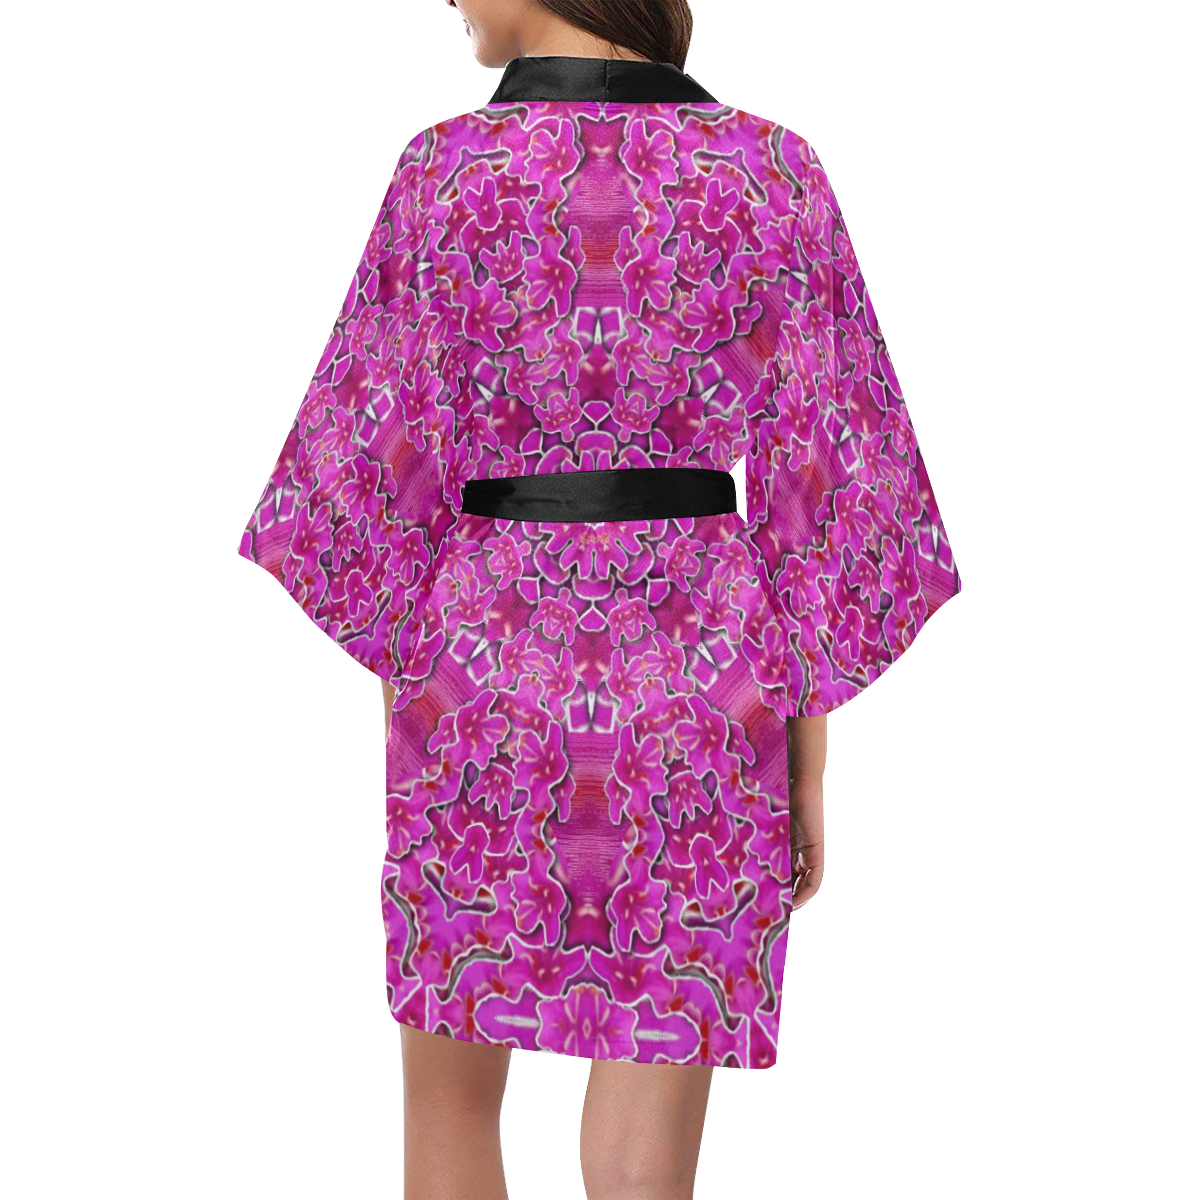 flowering and blooming to bring happiness Kimono Robe